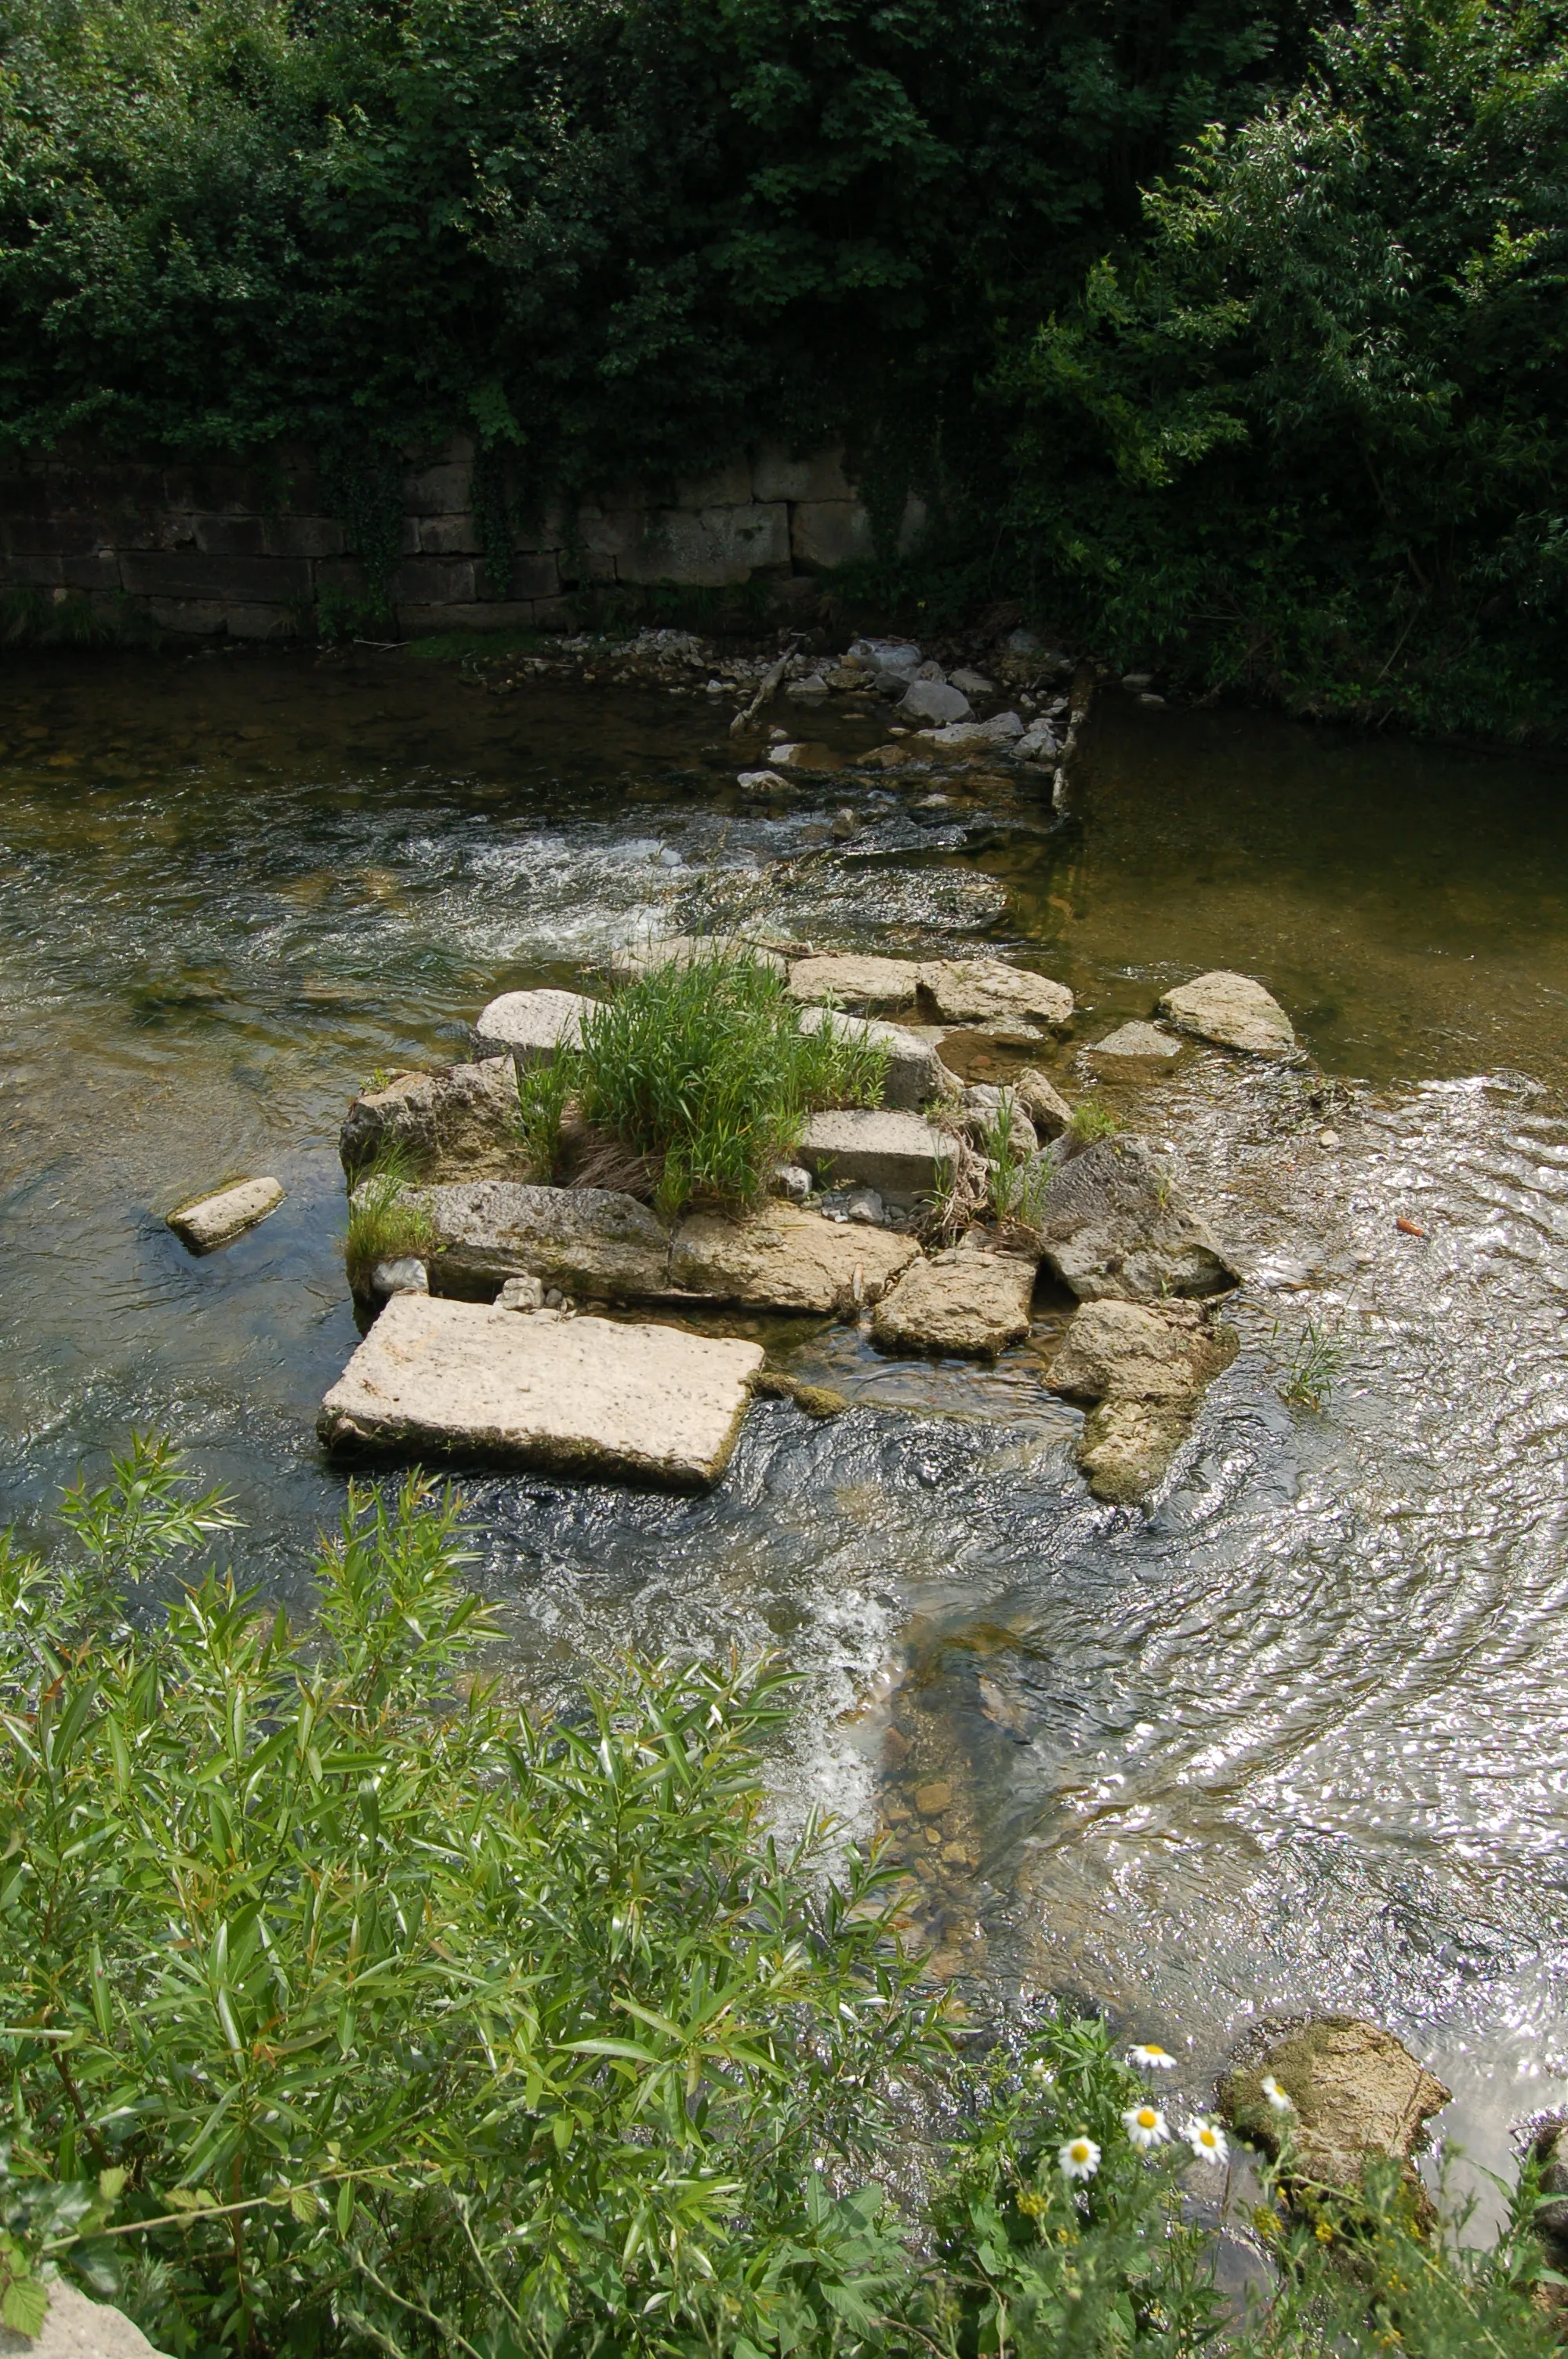 Photo showing: Remainders of the former weir in St. Veit an der Triesting, Berndorf, Lower Austria was surveilled by the Flood warning tower nearby.